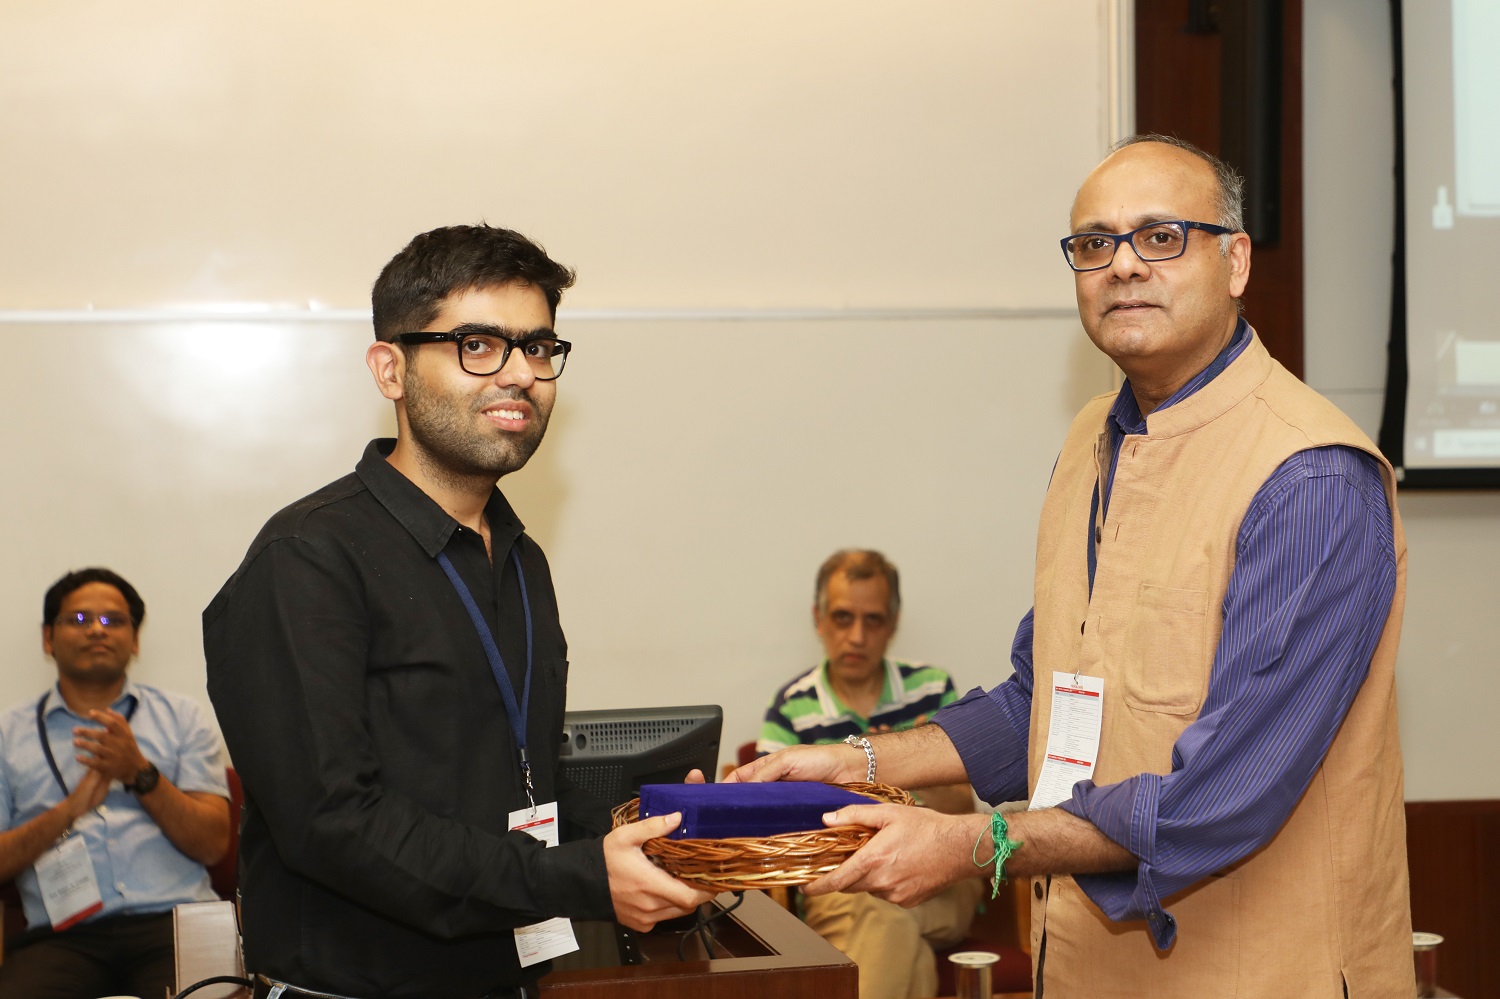 Abhishek Dureja, Indira Gandhi Institute of Development Research (IGIDR), Mumbai, receives the best paper award for his paper “Demand and Supply side Incentivization and Child Health Outcomes: Evidence from India” during the Awards Presentation at IMRDC 2023.